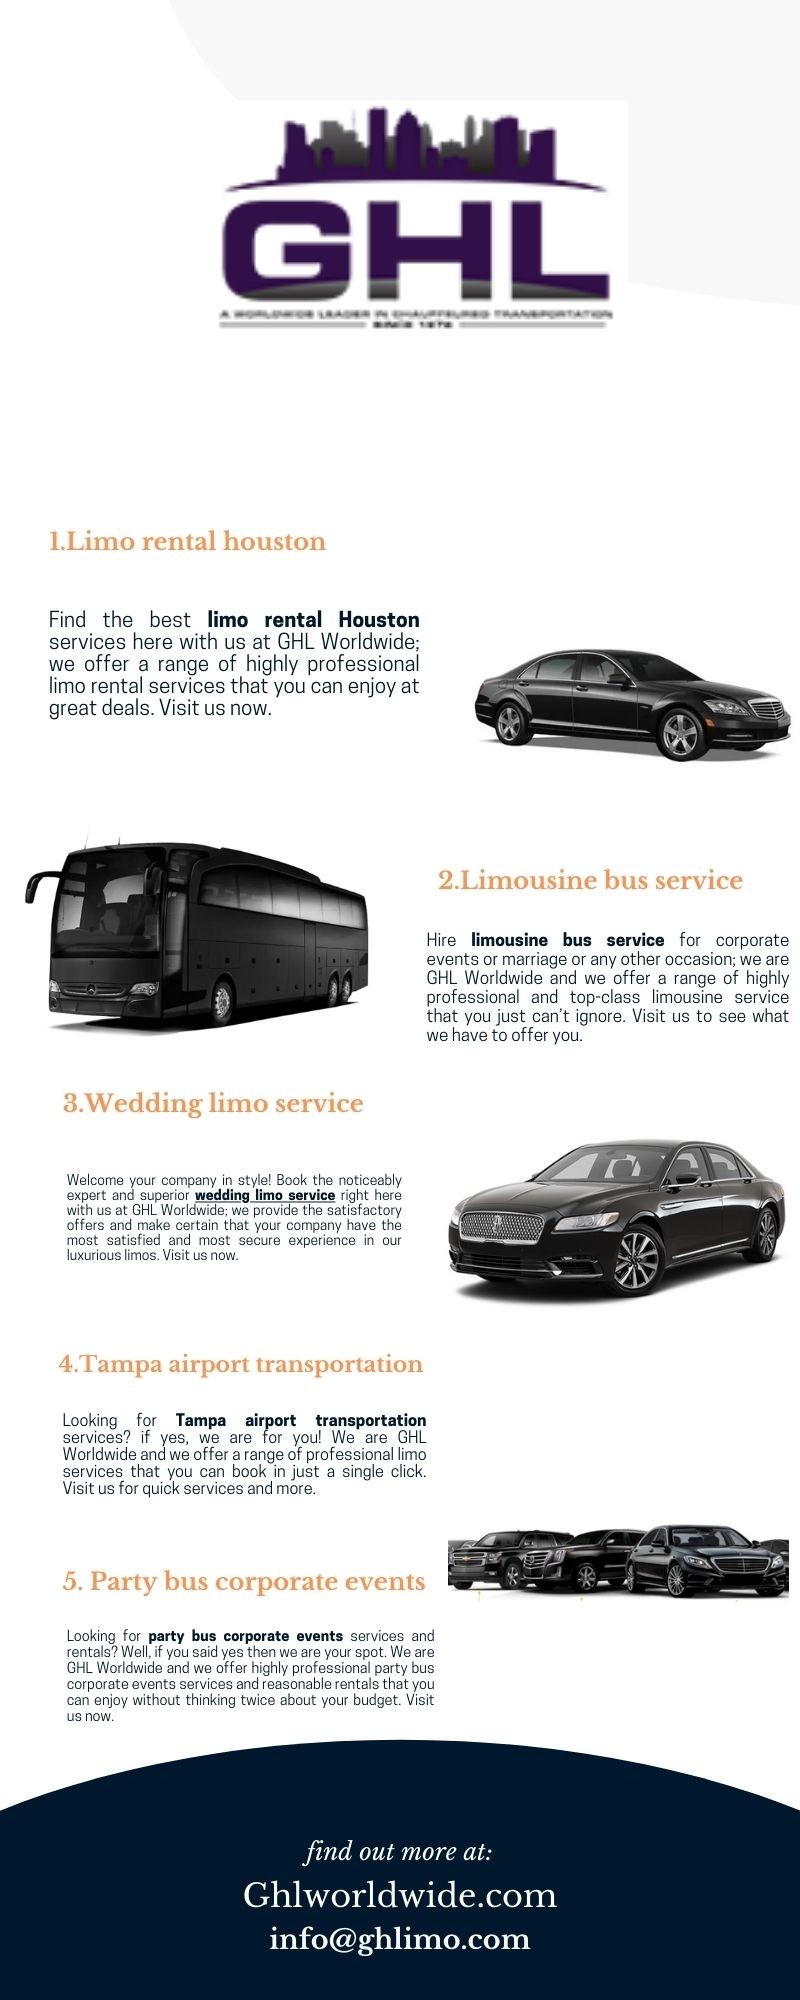 Hire us today for Airport Limo Service with GHL Worldwide